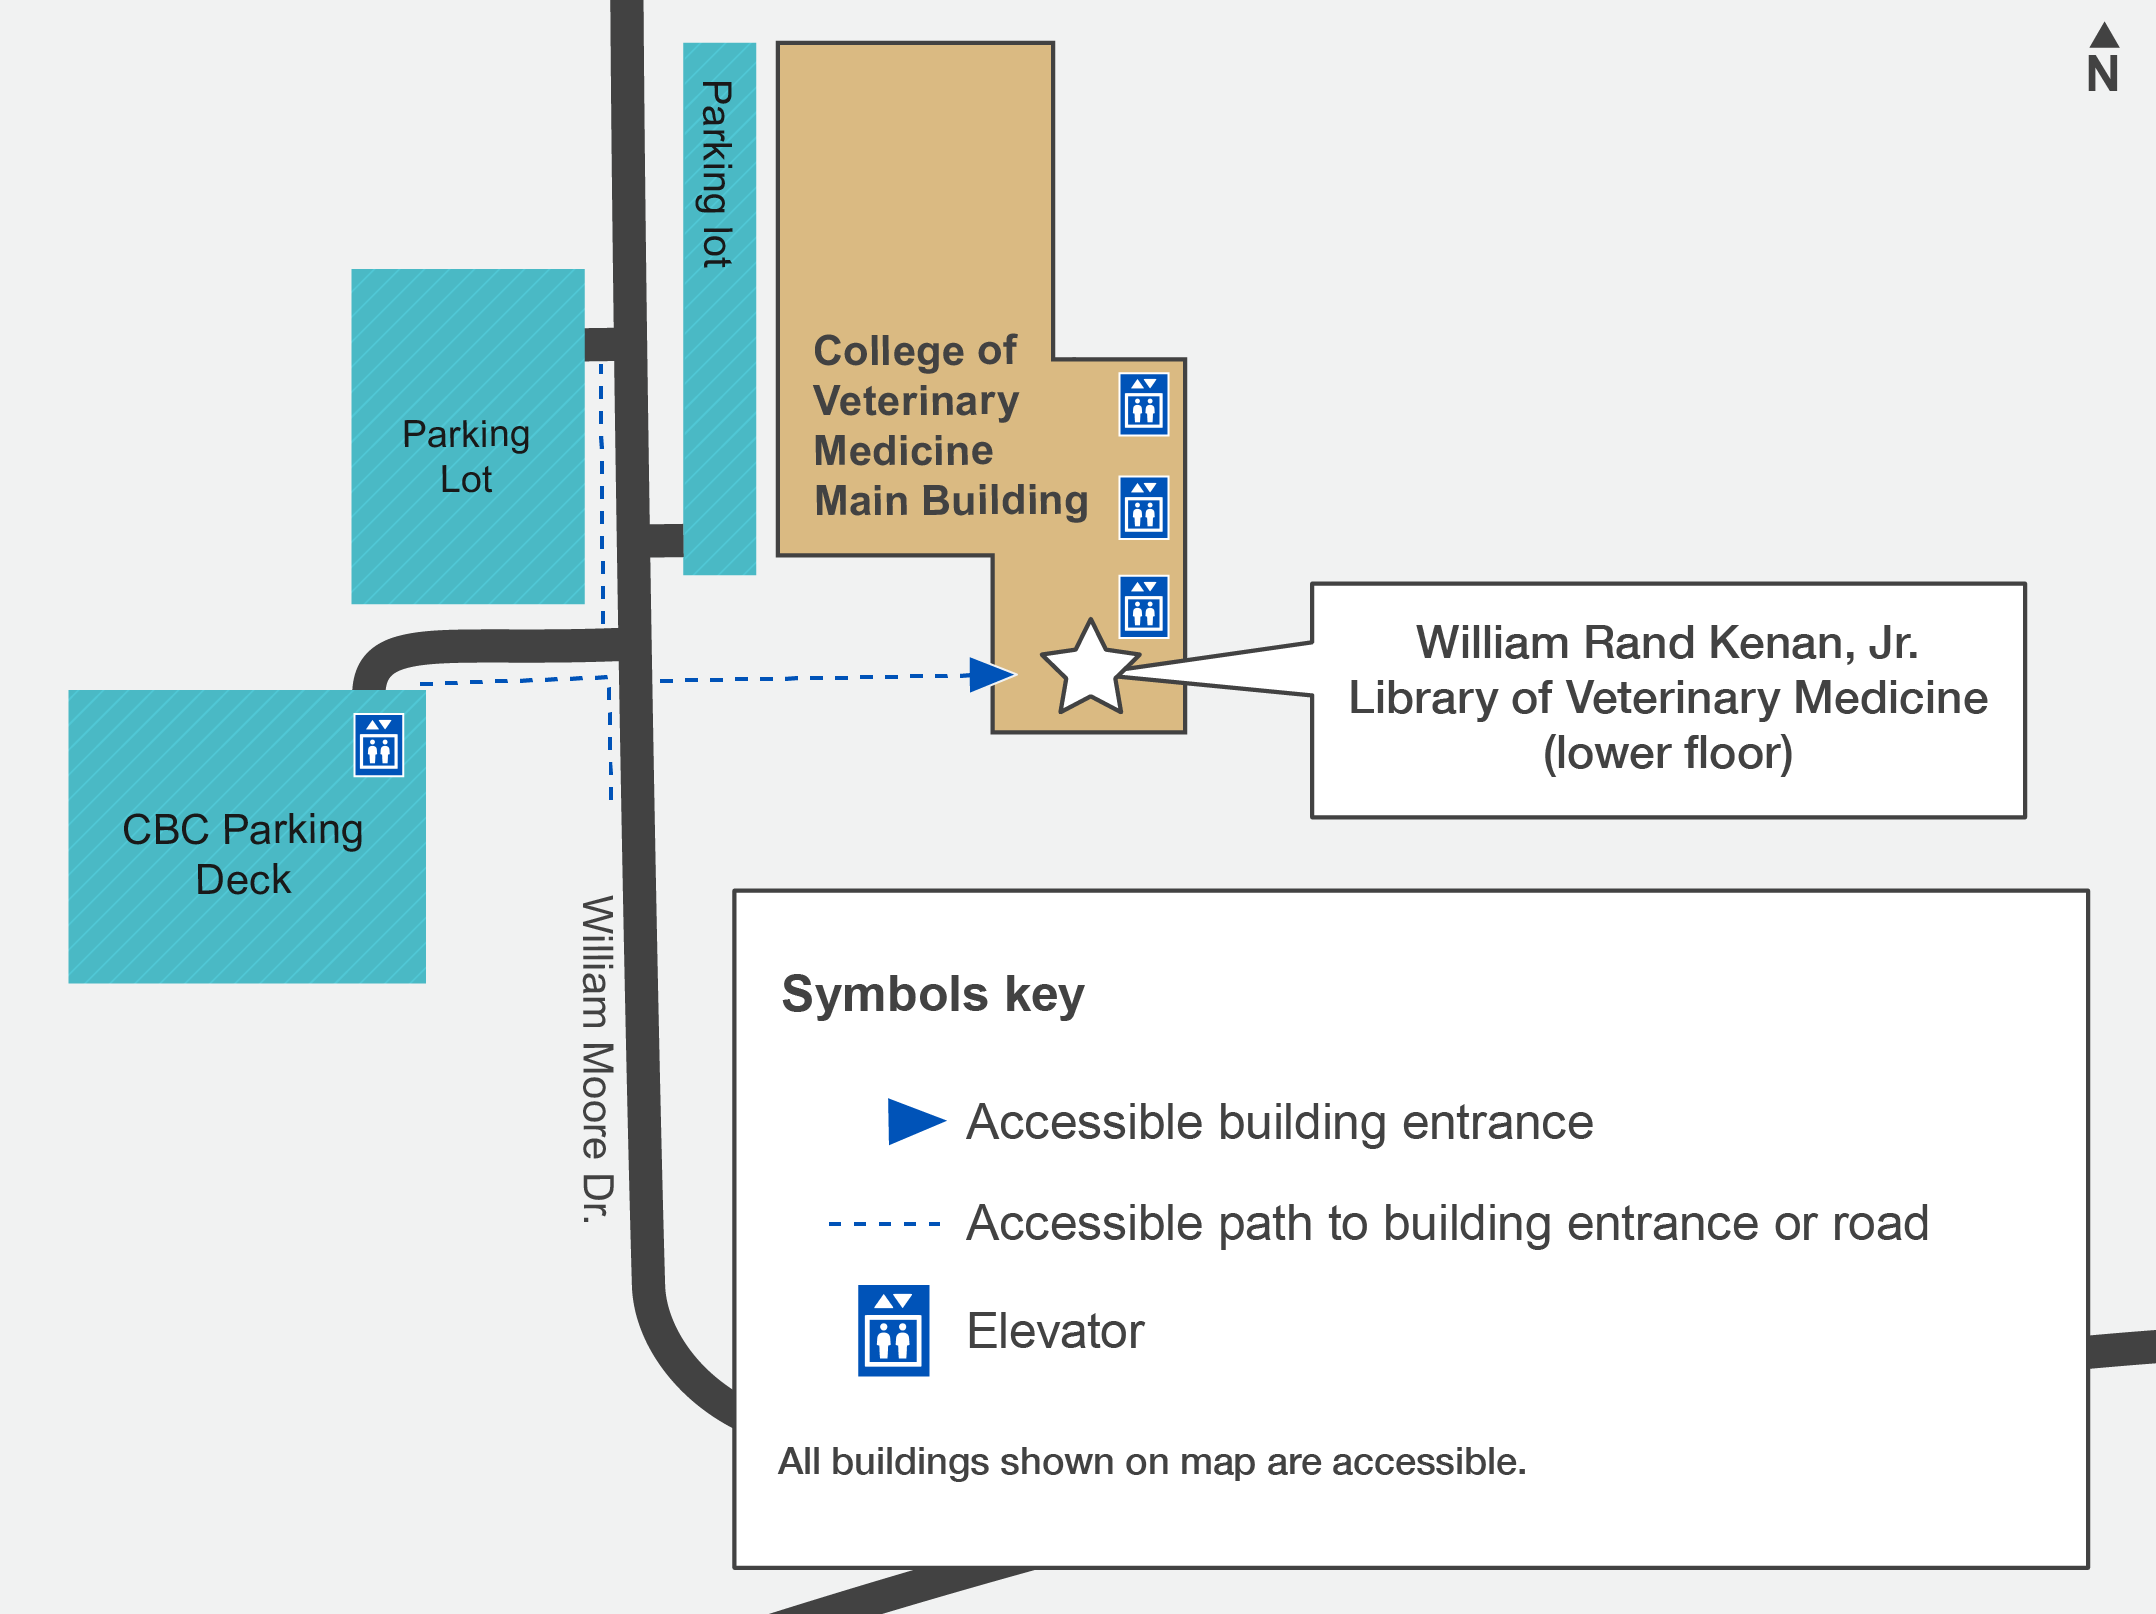 Map of entrance paths. Roads on this campus have accessible sidewalks and ramps. From William Moore Drive, there is an accessible path to the entrance of the College of Veterinary Medicine Main Building, where the VML is located on the lower floor.